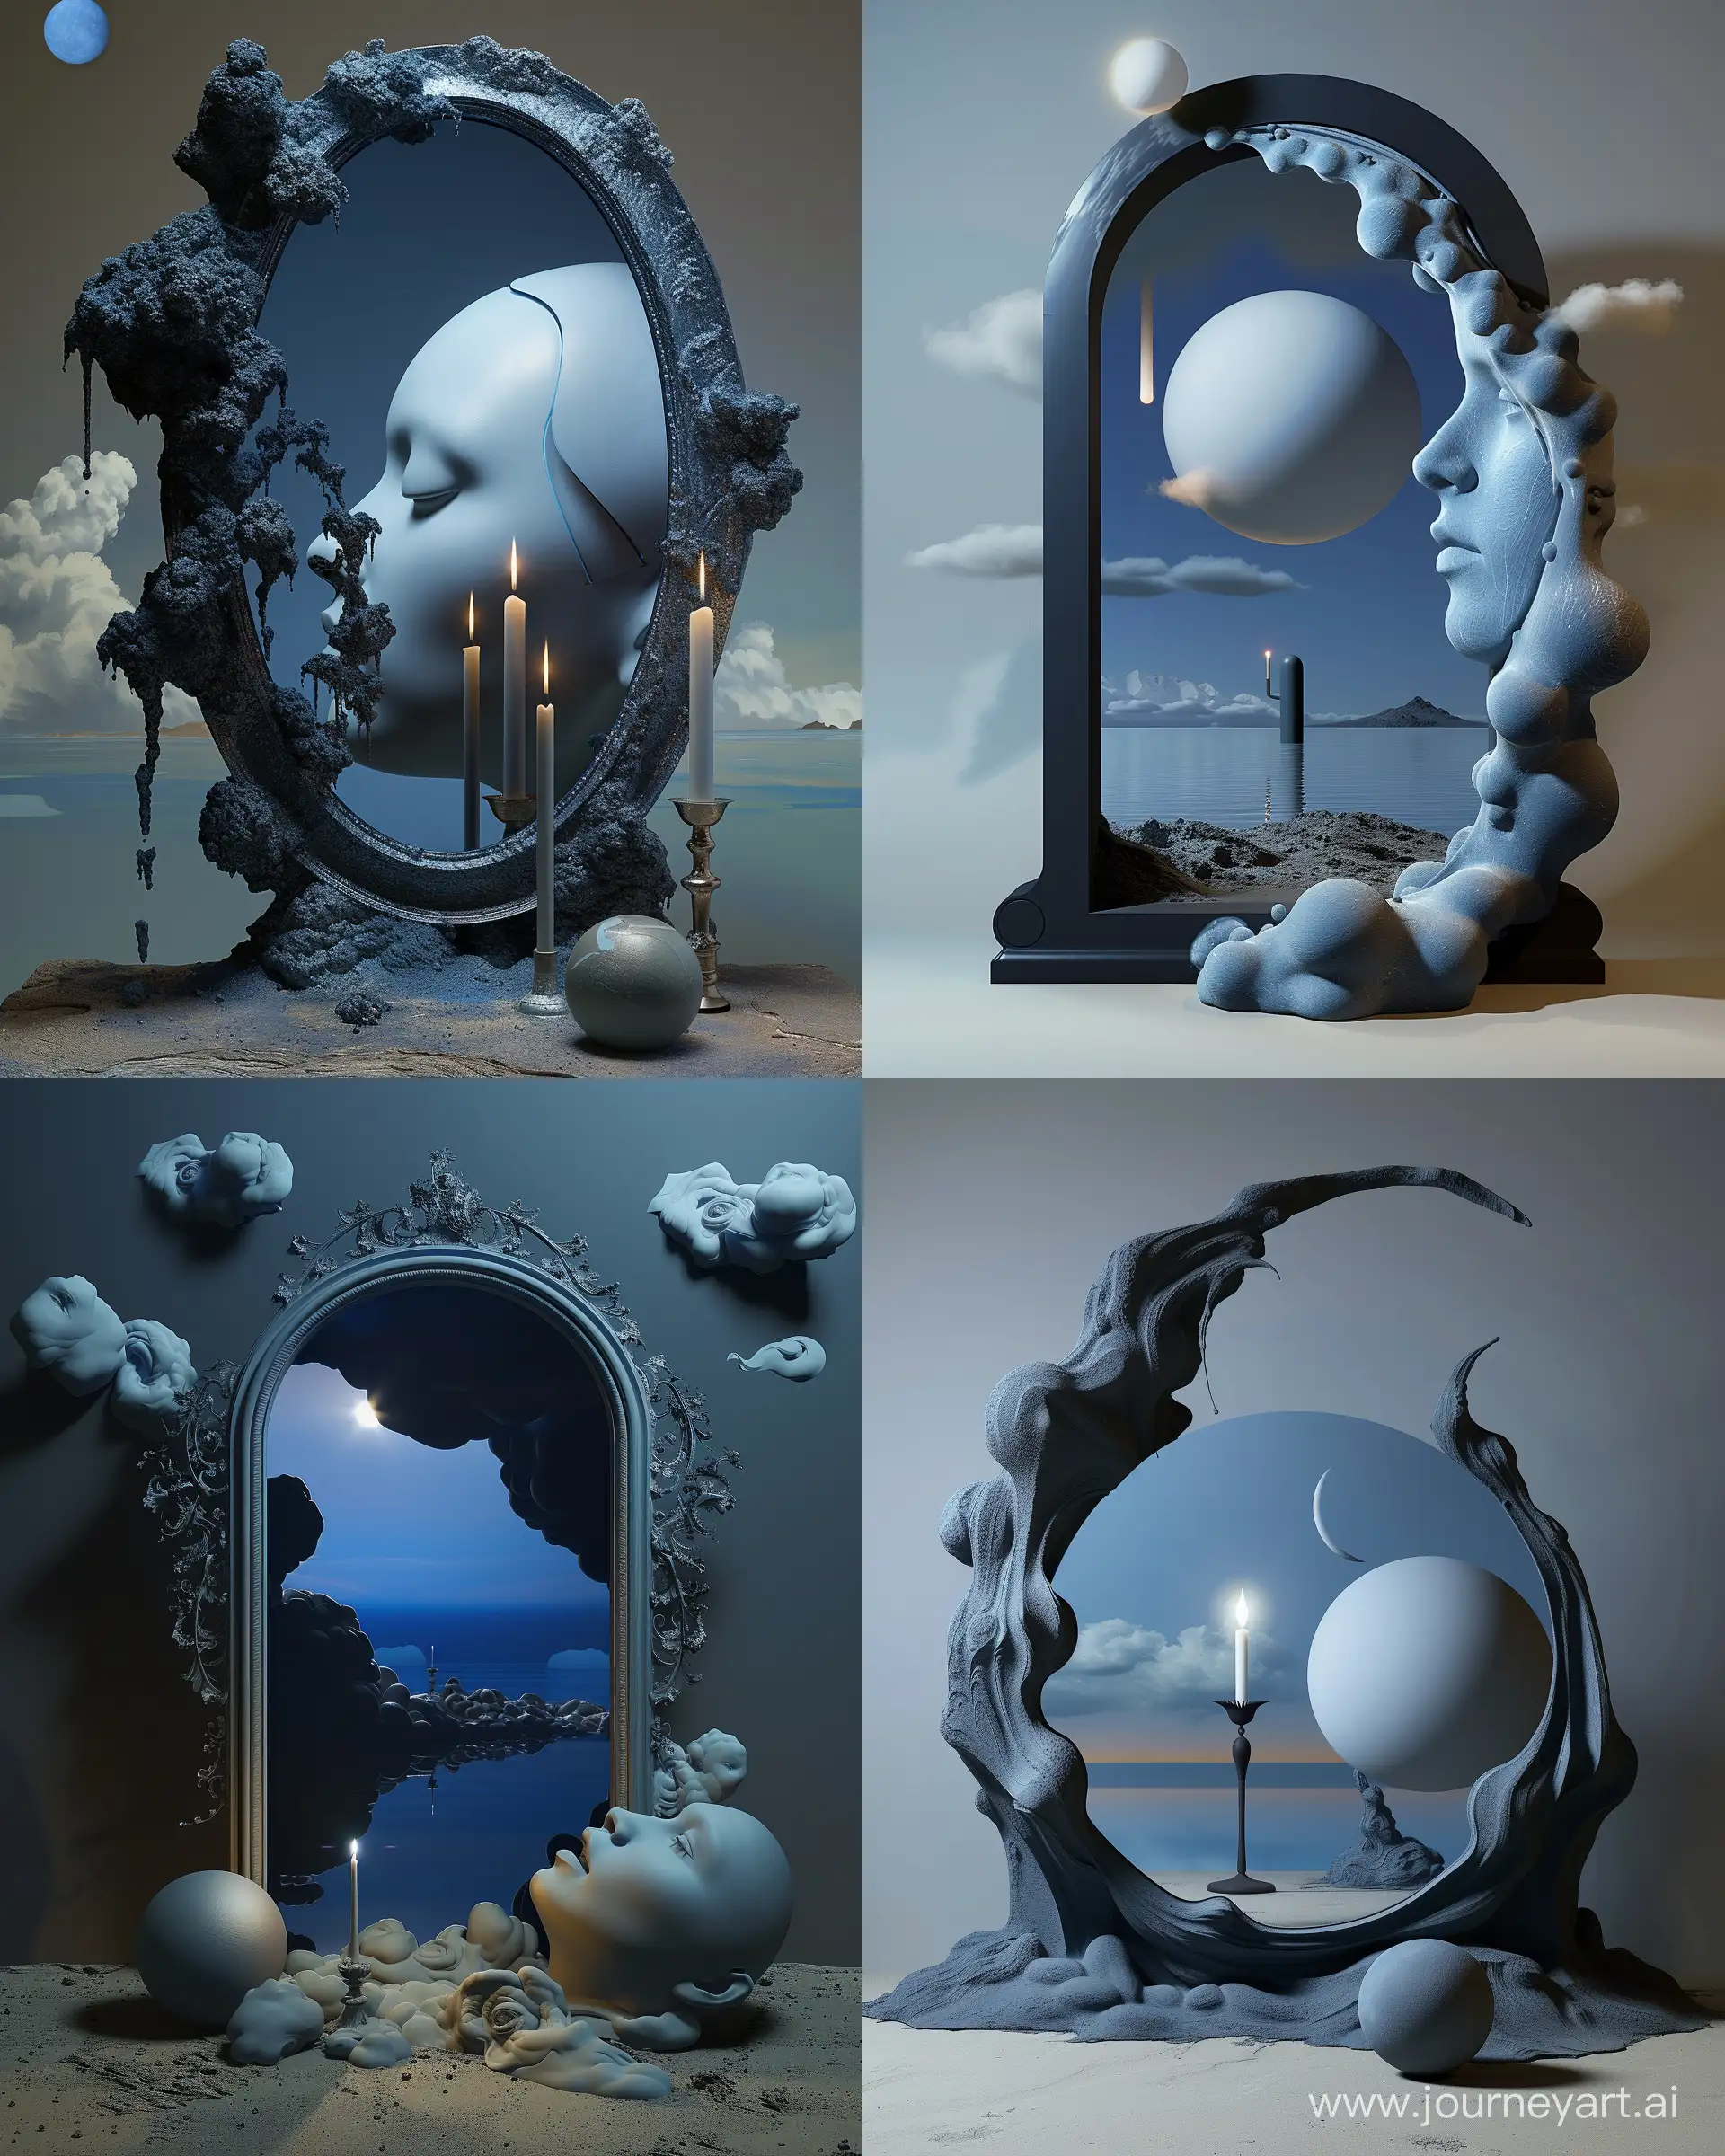 https://i.postimg.cc/rw73TdJ3/sdgery346-Abstract-and-poetic-sculpture-environment-art-in-a-r-e188aa8d-fc19-4253-abf3-e9e039fb9bb7.png, abstract dark blue atmosphere, black surrealistic mirror, abstract portrait sculpture --ar 4:5 --v 6 --ar 1:1 --no 74308